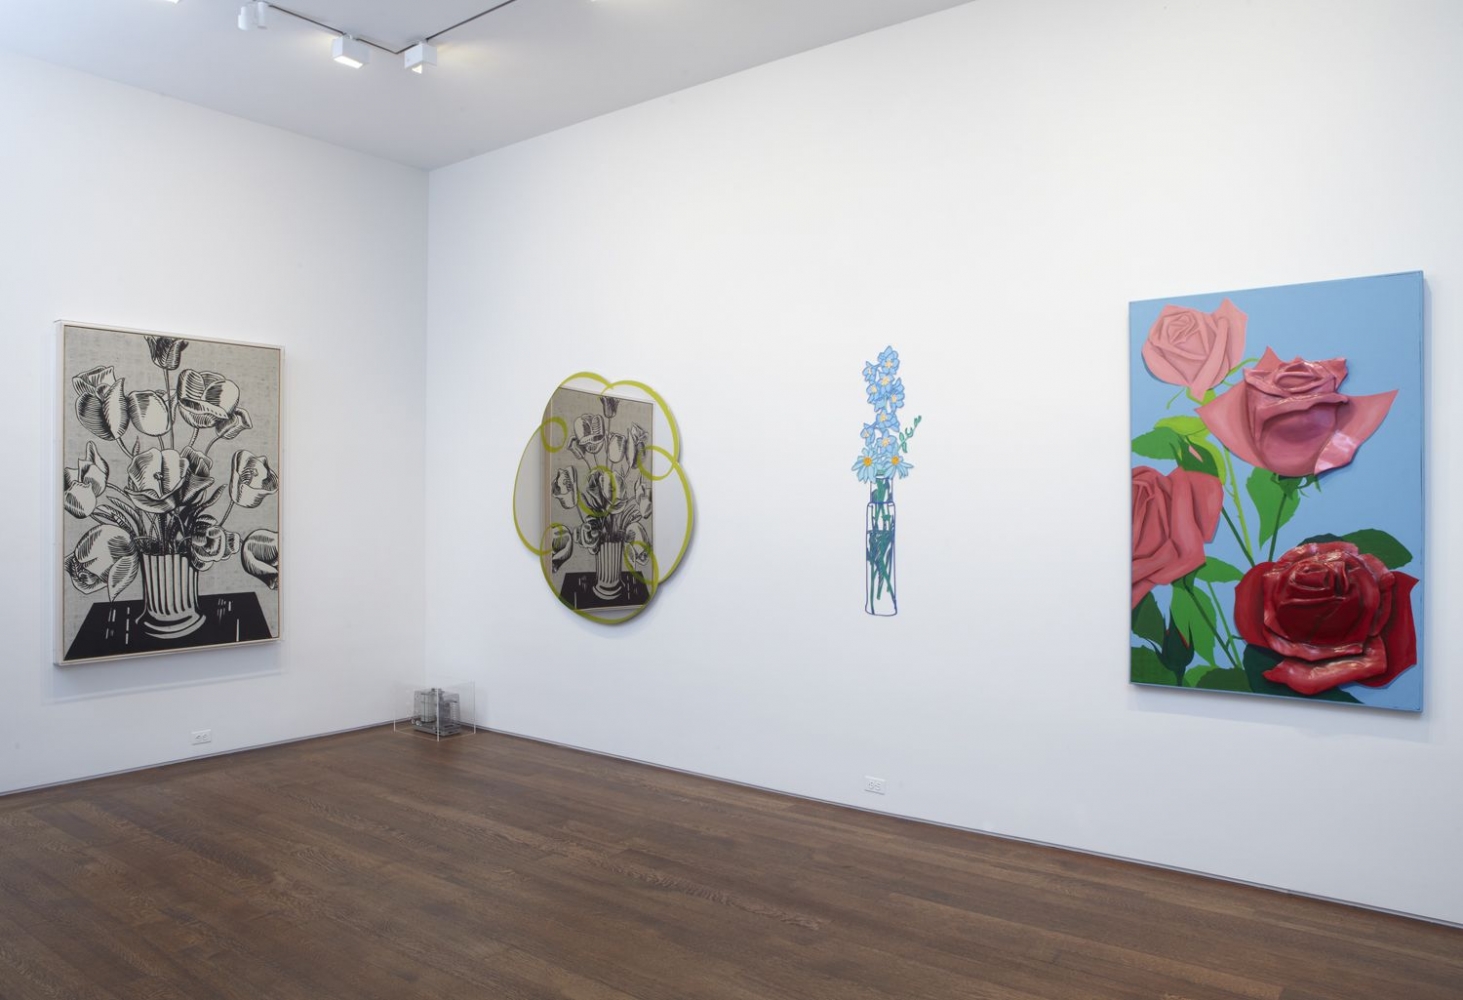 ​Installation view of The Pop Object: The Still Life Tradition in Pop Art, April 9 - May 23, 2013. Left to right: